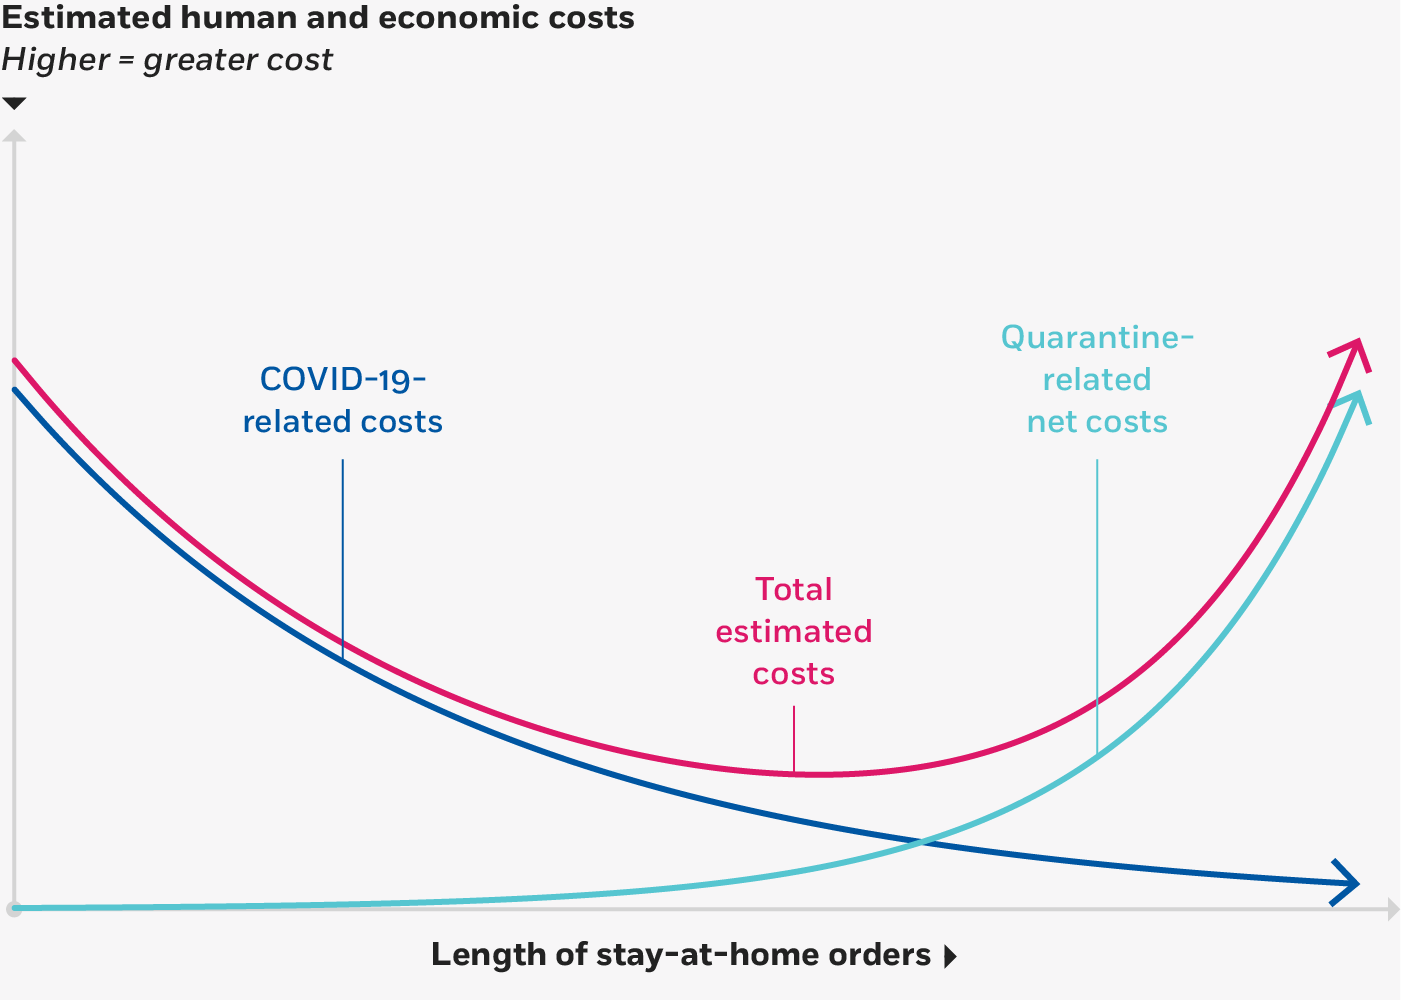 Another line diagram showing rising estimated human and economic costs on the y-axis and increasing length of stay-at-home orders on the x-axis. Trend curves again show COVID-19-related costs falling and quarantine-related net costs rising over time. But a new curve labeled total estimated costs initially falls along a path similar to COVID-19 costs but then rises upward at the halfway point on a path similar to quarantine costs. 